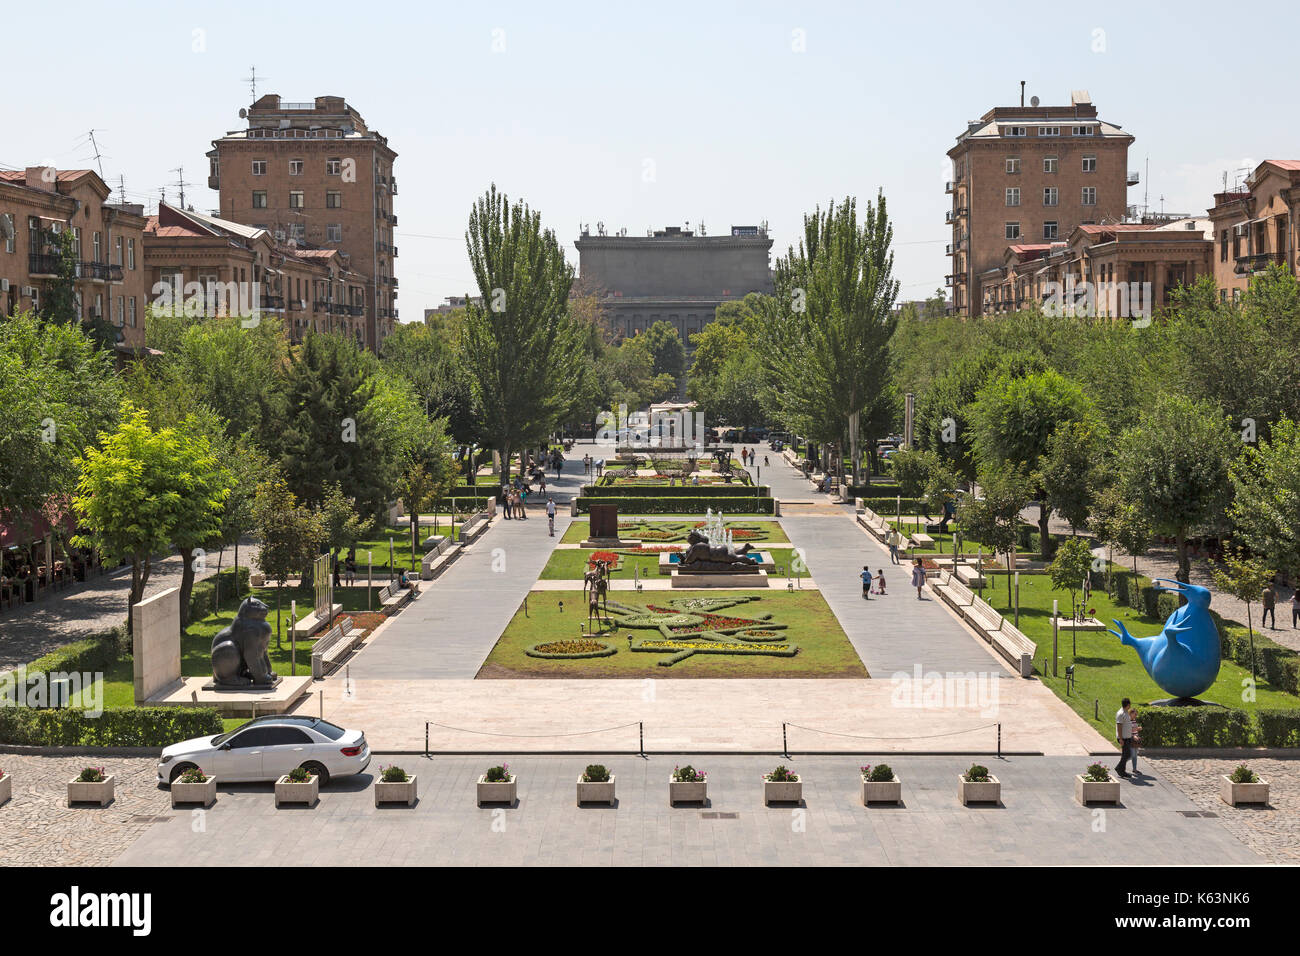 View looking down from the Cascade Museum of art in Yerevan, Armenia, showing gardens and flower beds. Stock Photo